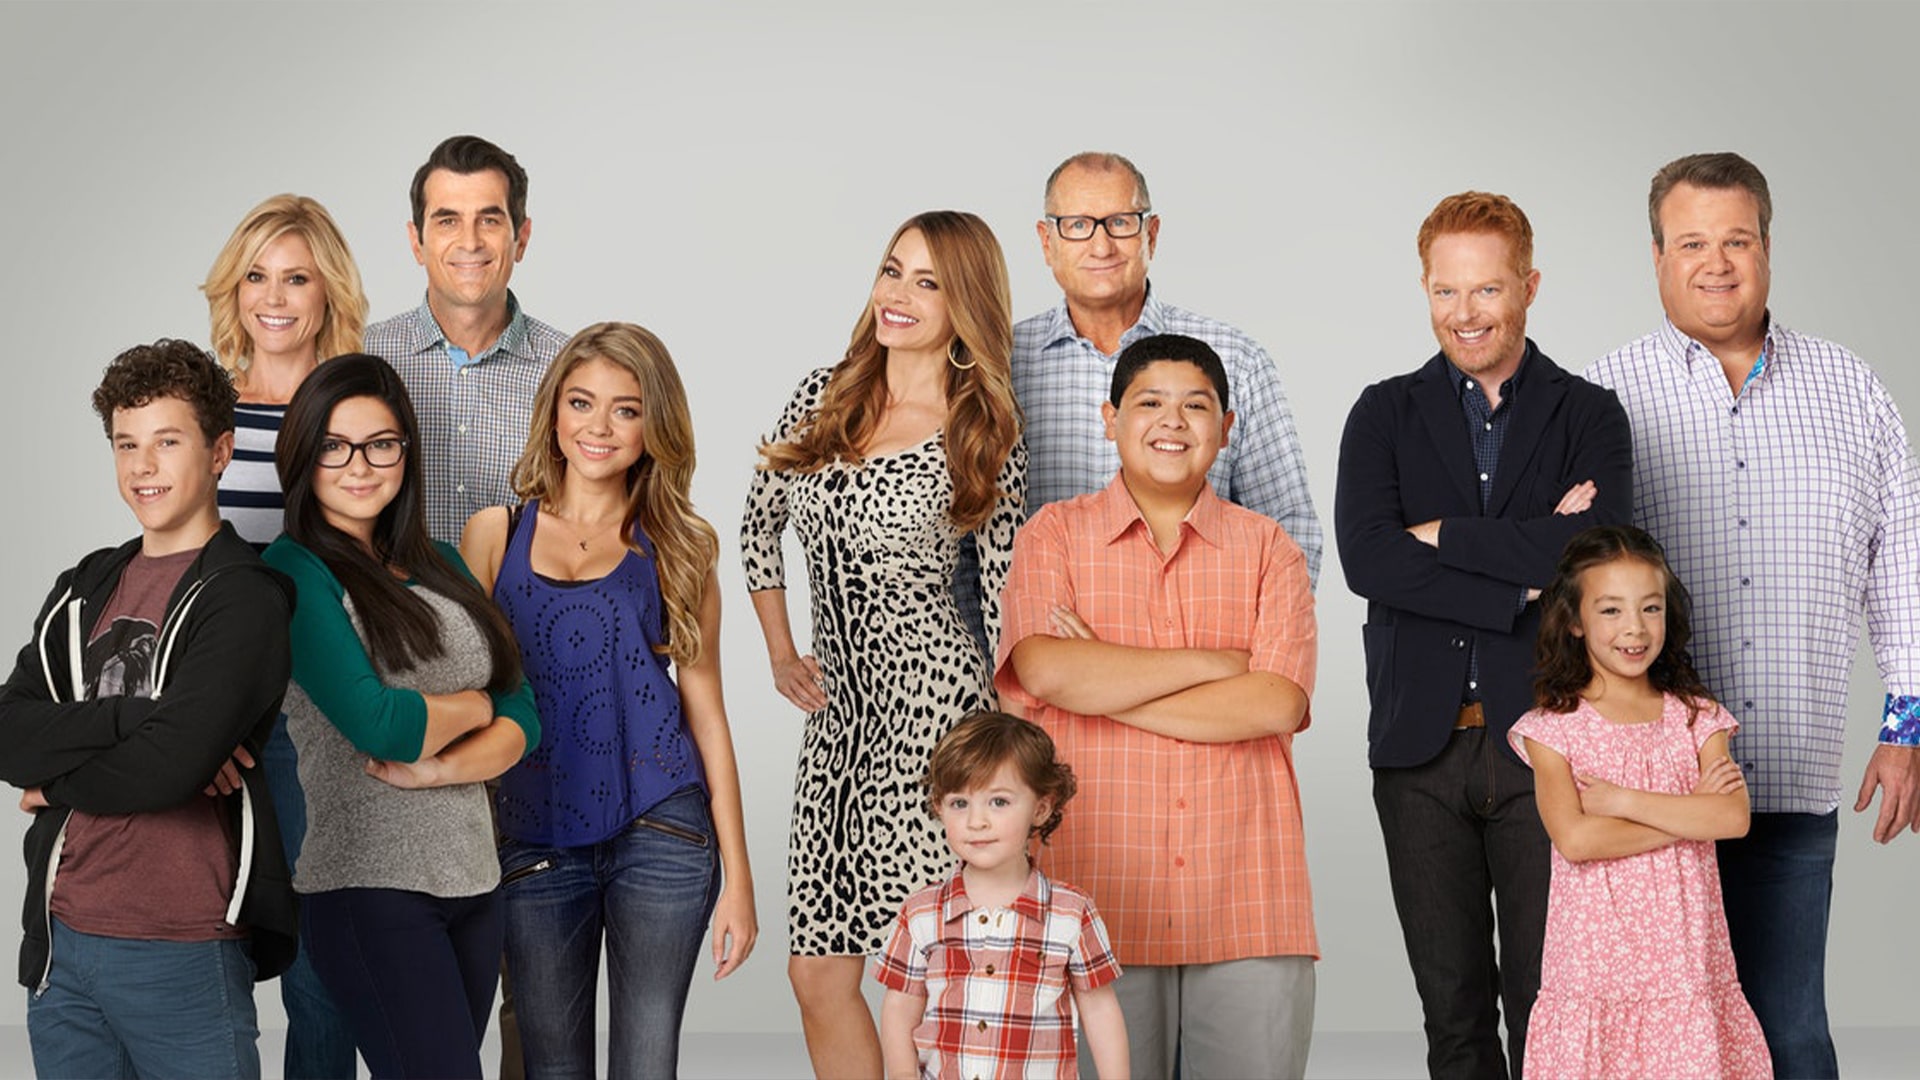 Who Said These 30 Modern Family Quotes Quiz - Modern Family Quotes Quiz